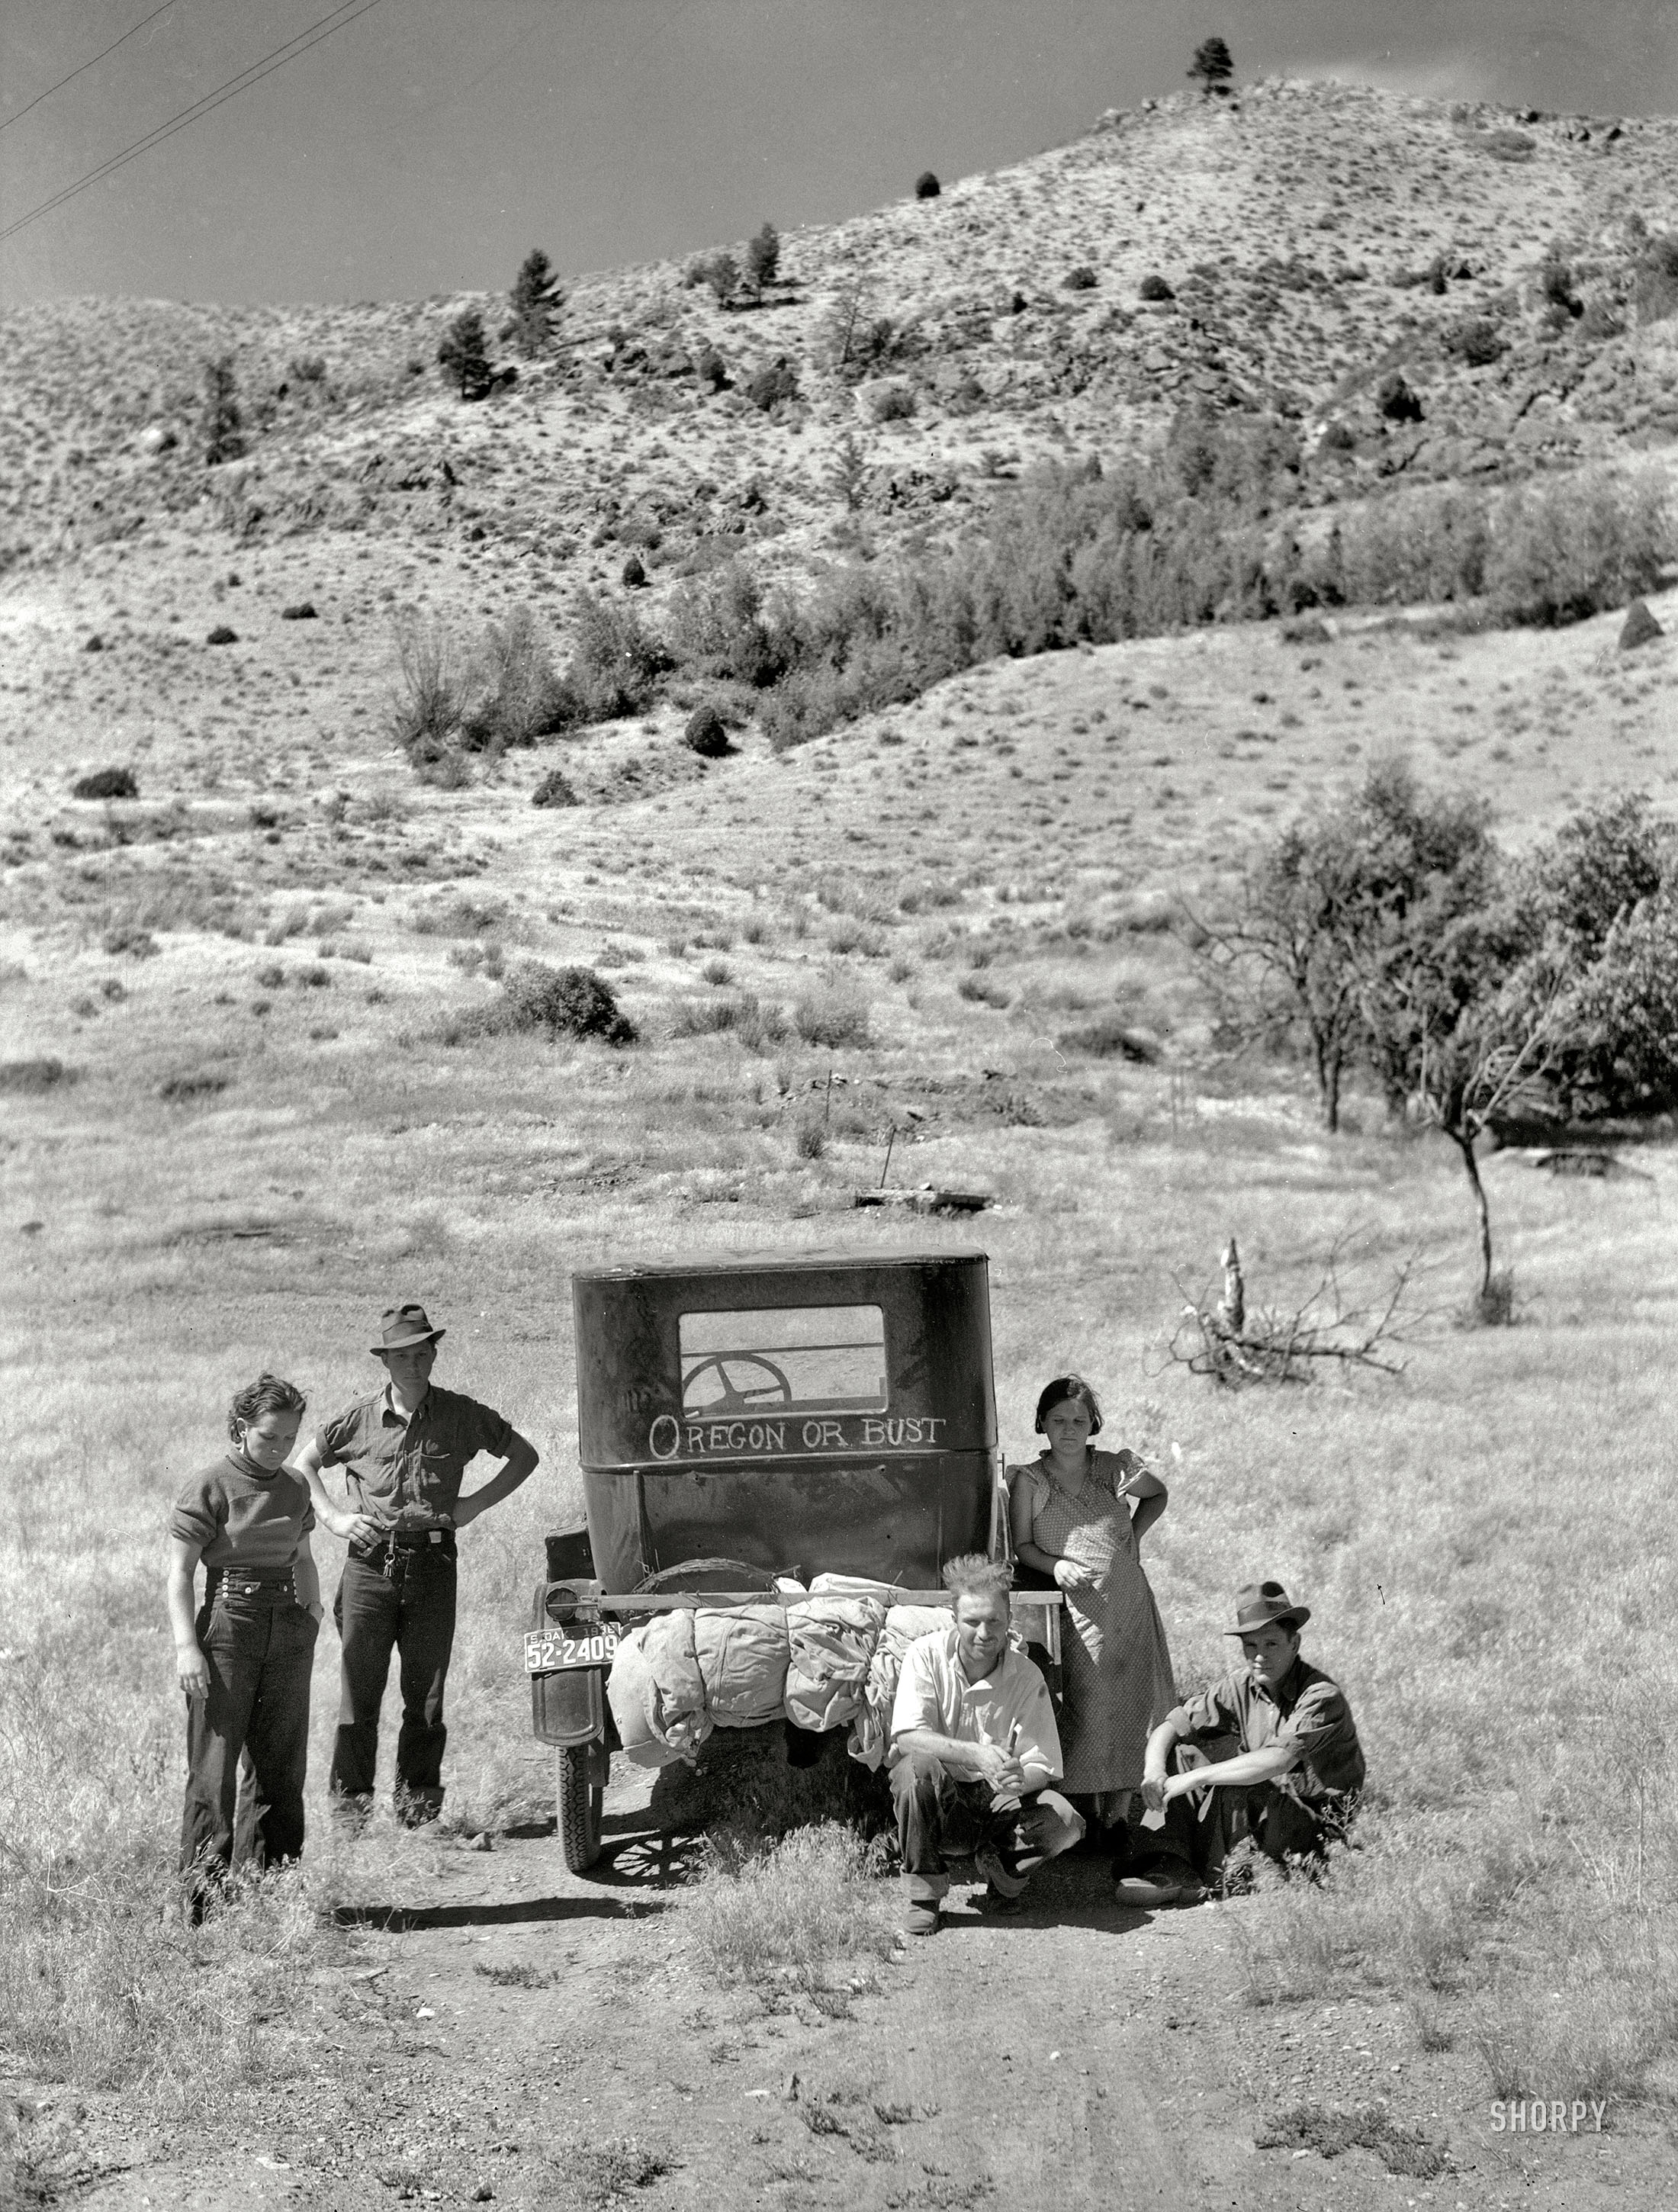 July 1936. "Vernon Evans [interview] and family of Lemmon, South Dakota, near Missoula, Montana. Leaving the grasshopper-ridden and drought-stricken area for a new start in Oregon or Washington. Expects to arrive at Yakima in time for hop picking. Makes about 200 miles a day in Model T Ford. Live in tent." Medium-format nitrate negative by Arthur Rothstein. View full size.